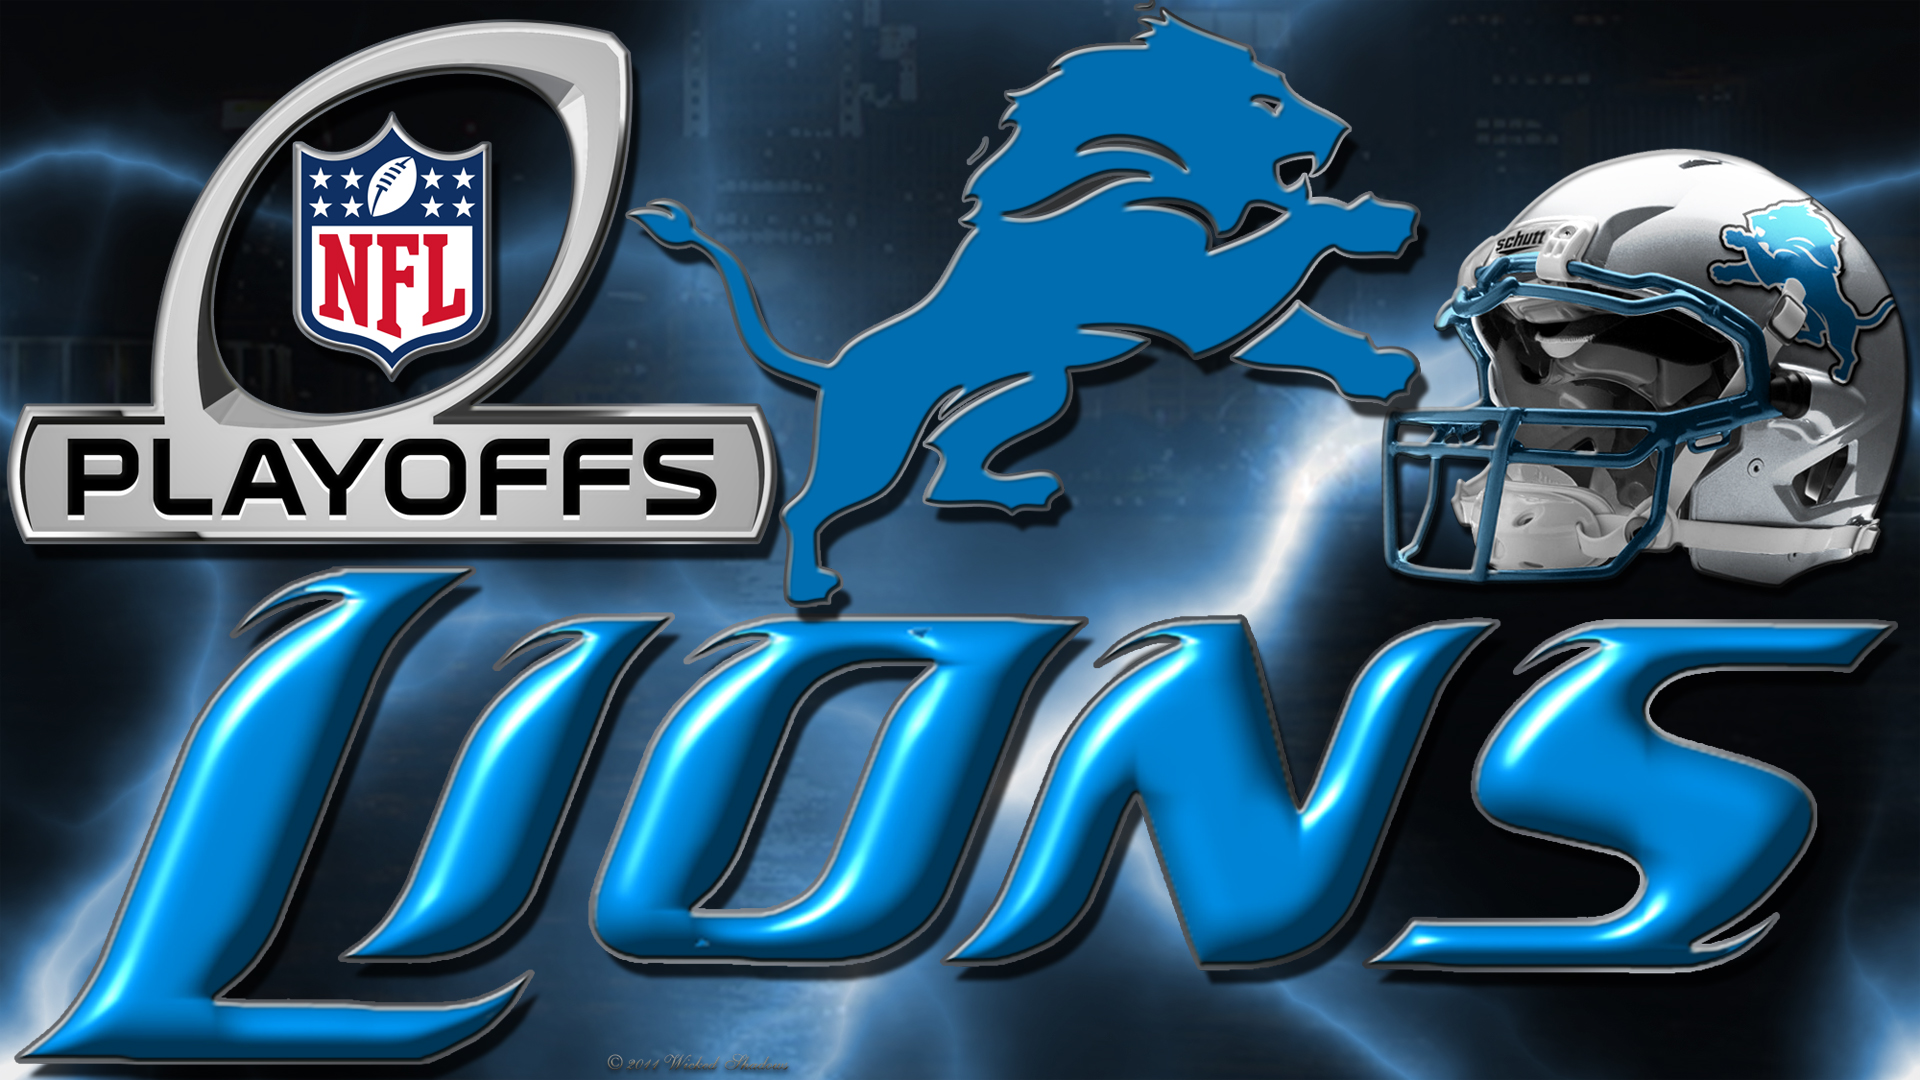 Wallpaper By Wicked Shadows Detroit Lions Playoffs